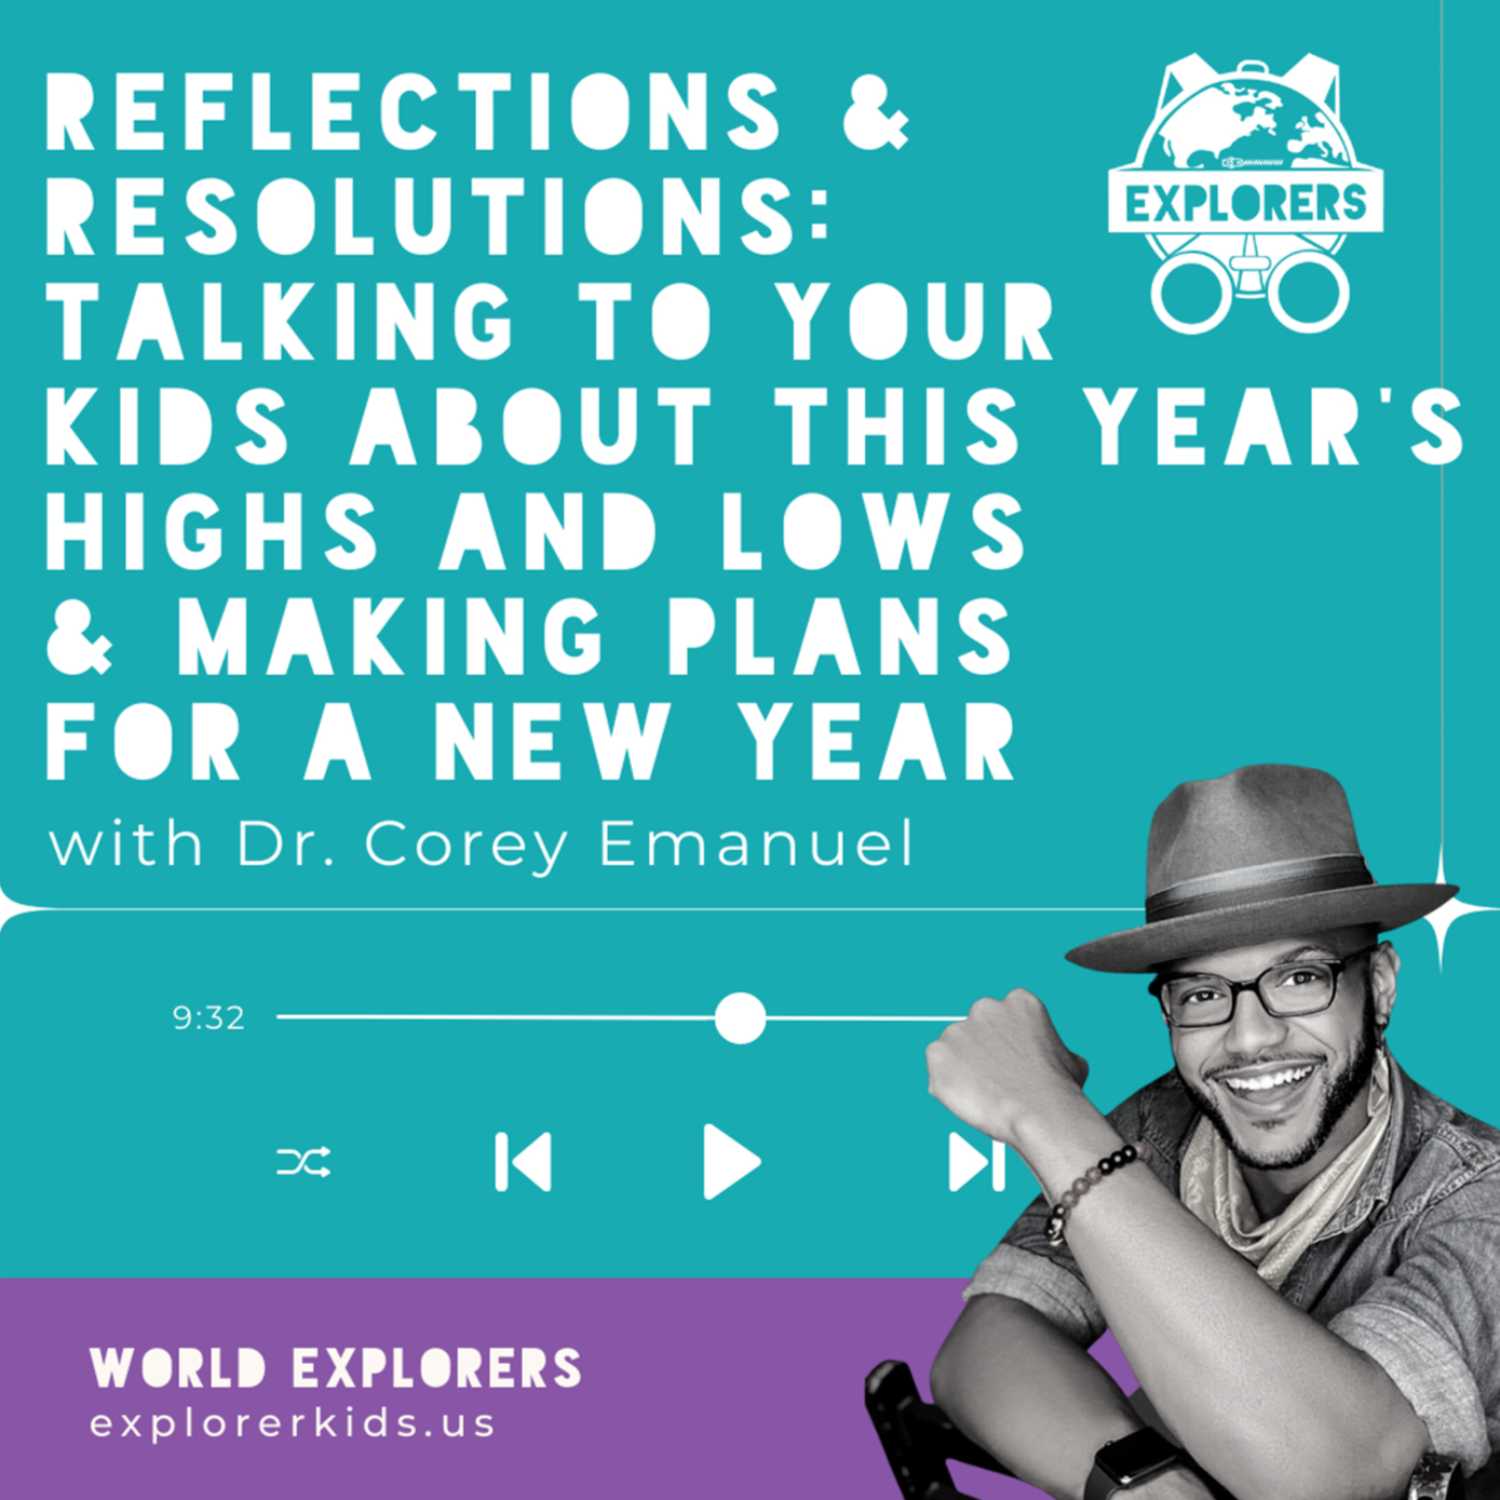 Reflections & Resolutions: Talking to Your Kids About This Year's Highs and Lows & Making Plans for a New Year